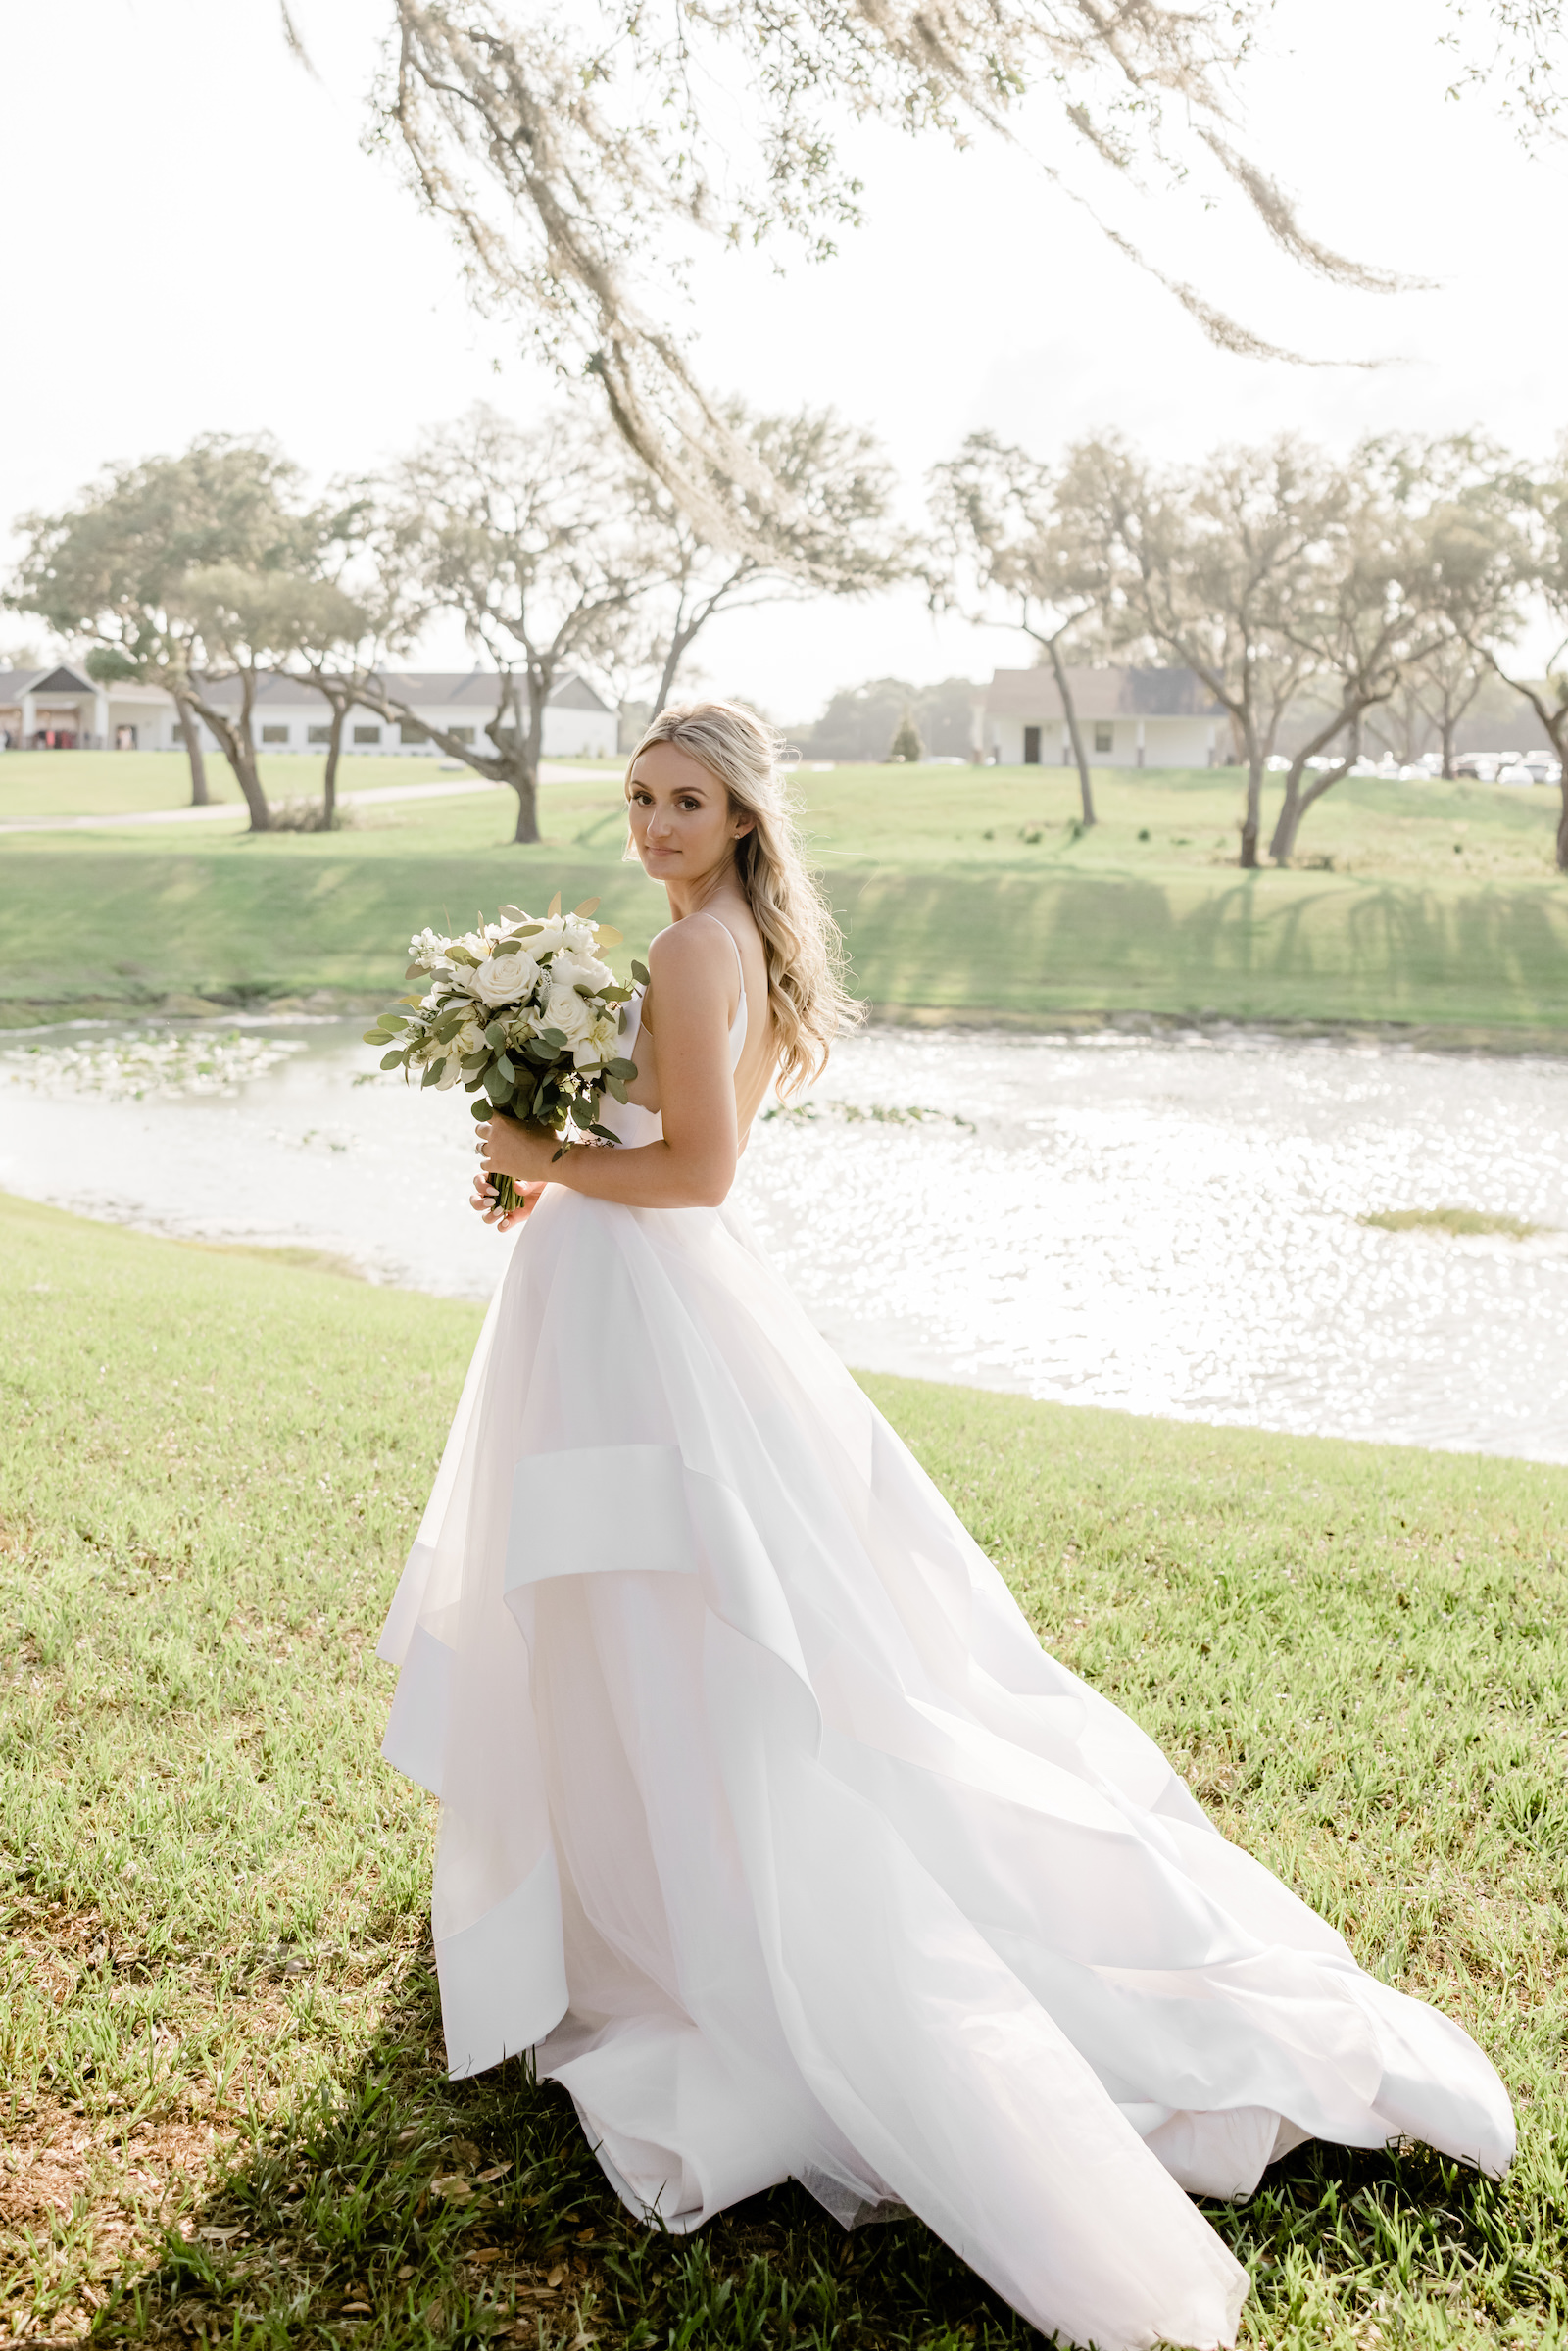 Tampa Bride Wearing Hayley Paige Ballgown Wedding Dress Holding Classic White Floral Bouquet, Beauty Wedding Portrait by Lake